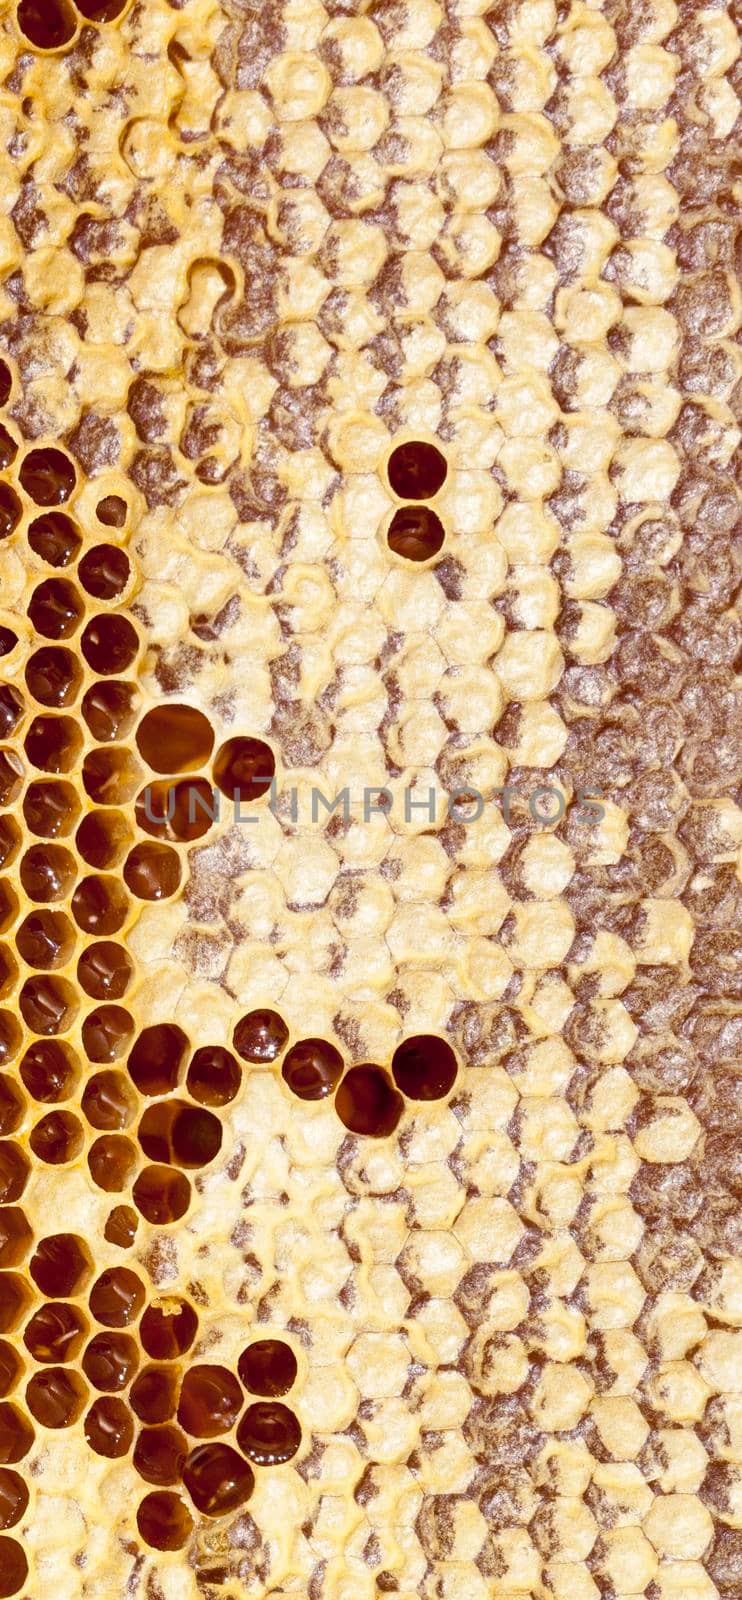 Beautiful honey filled and closed honeycombs, wholesome natural food